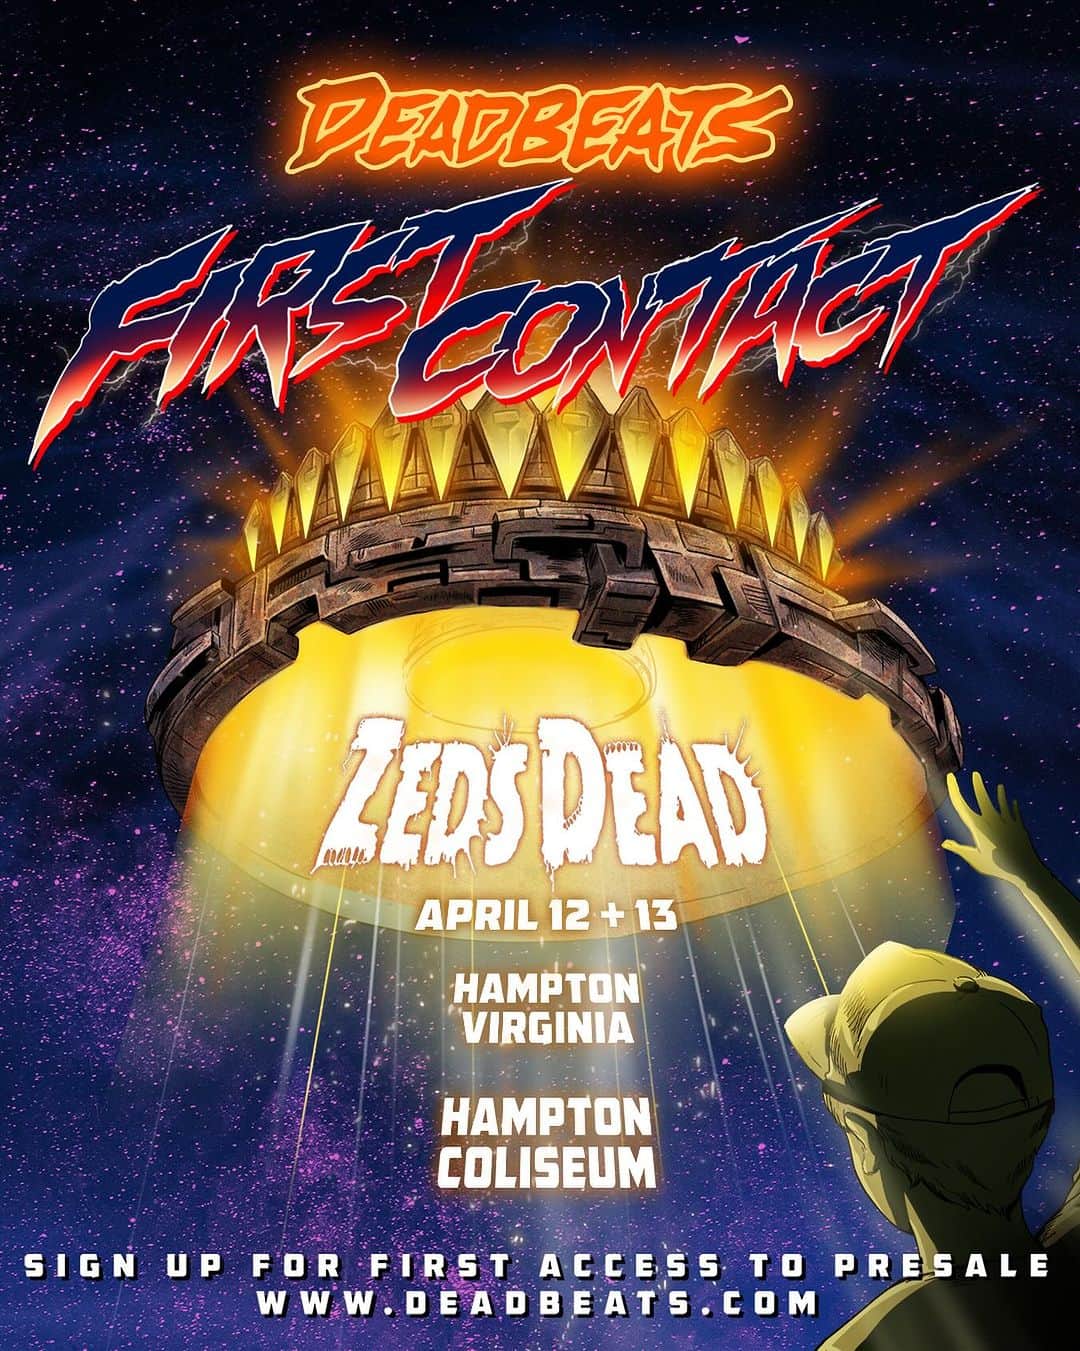 Zeds Deadのインスタグラム：「Insanely excited to announce FIRST CONTACT at the Hampton Coliseum. We’re designing the show, production, and experience specifically for this legendary space…and we’ve got a special lineup curated top to the bottom each day that just might be the most wild one we’ve ever put together. With 2 nights and 2 sets from us to take you on the journey of a lifetime each night. We cannot wait to share this experience with you all. Sign up now for first access to tickets, we hope you all enjoy the trip!」